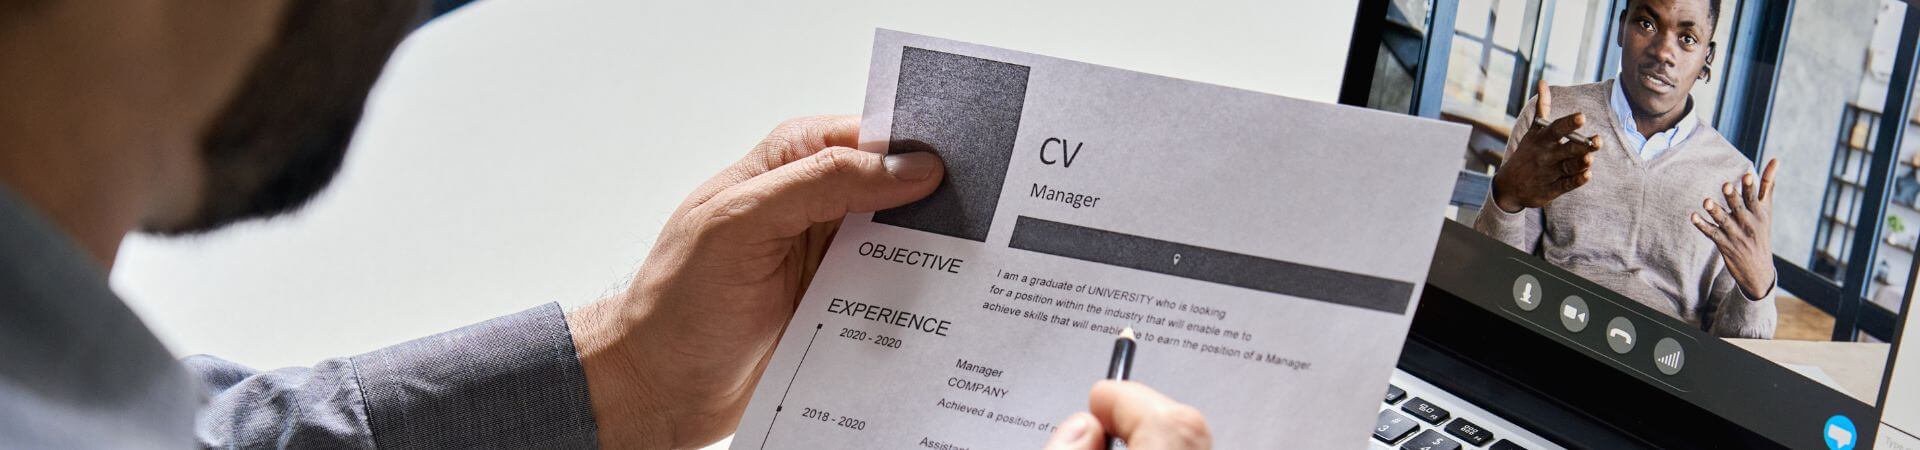 A person holds up their resume while attending a virtual job fair on their laptop.